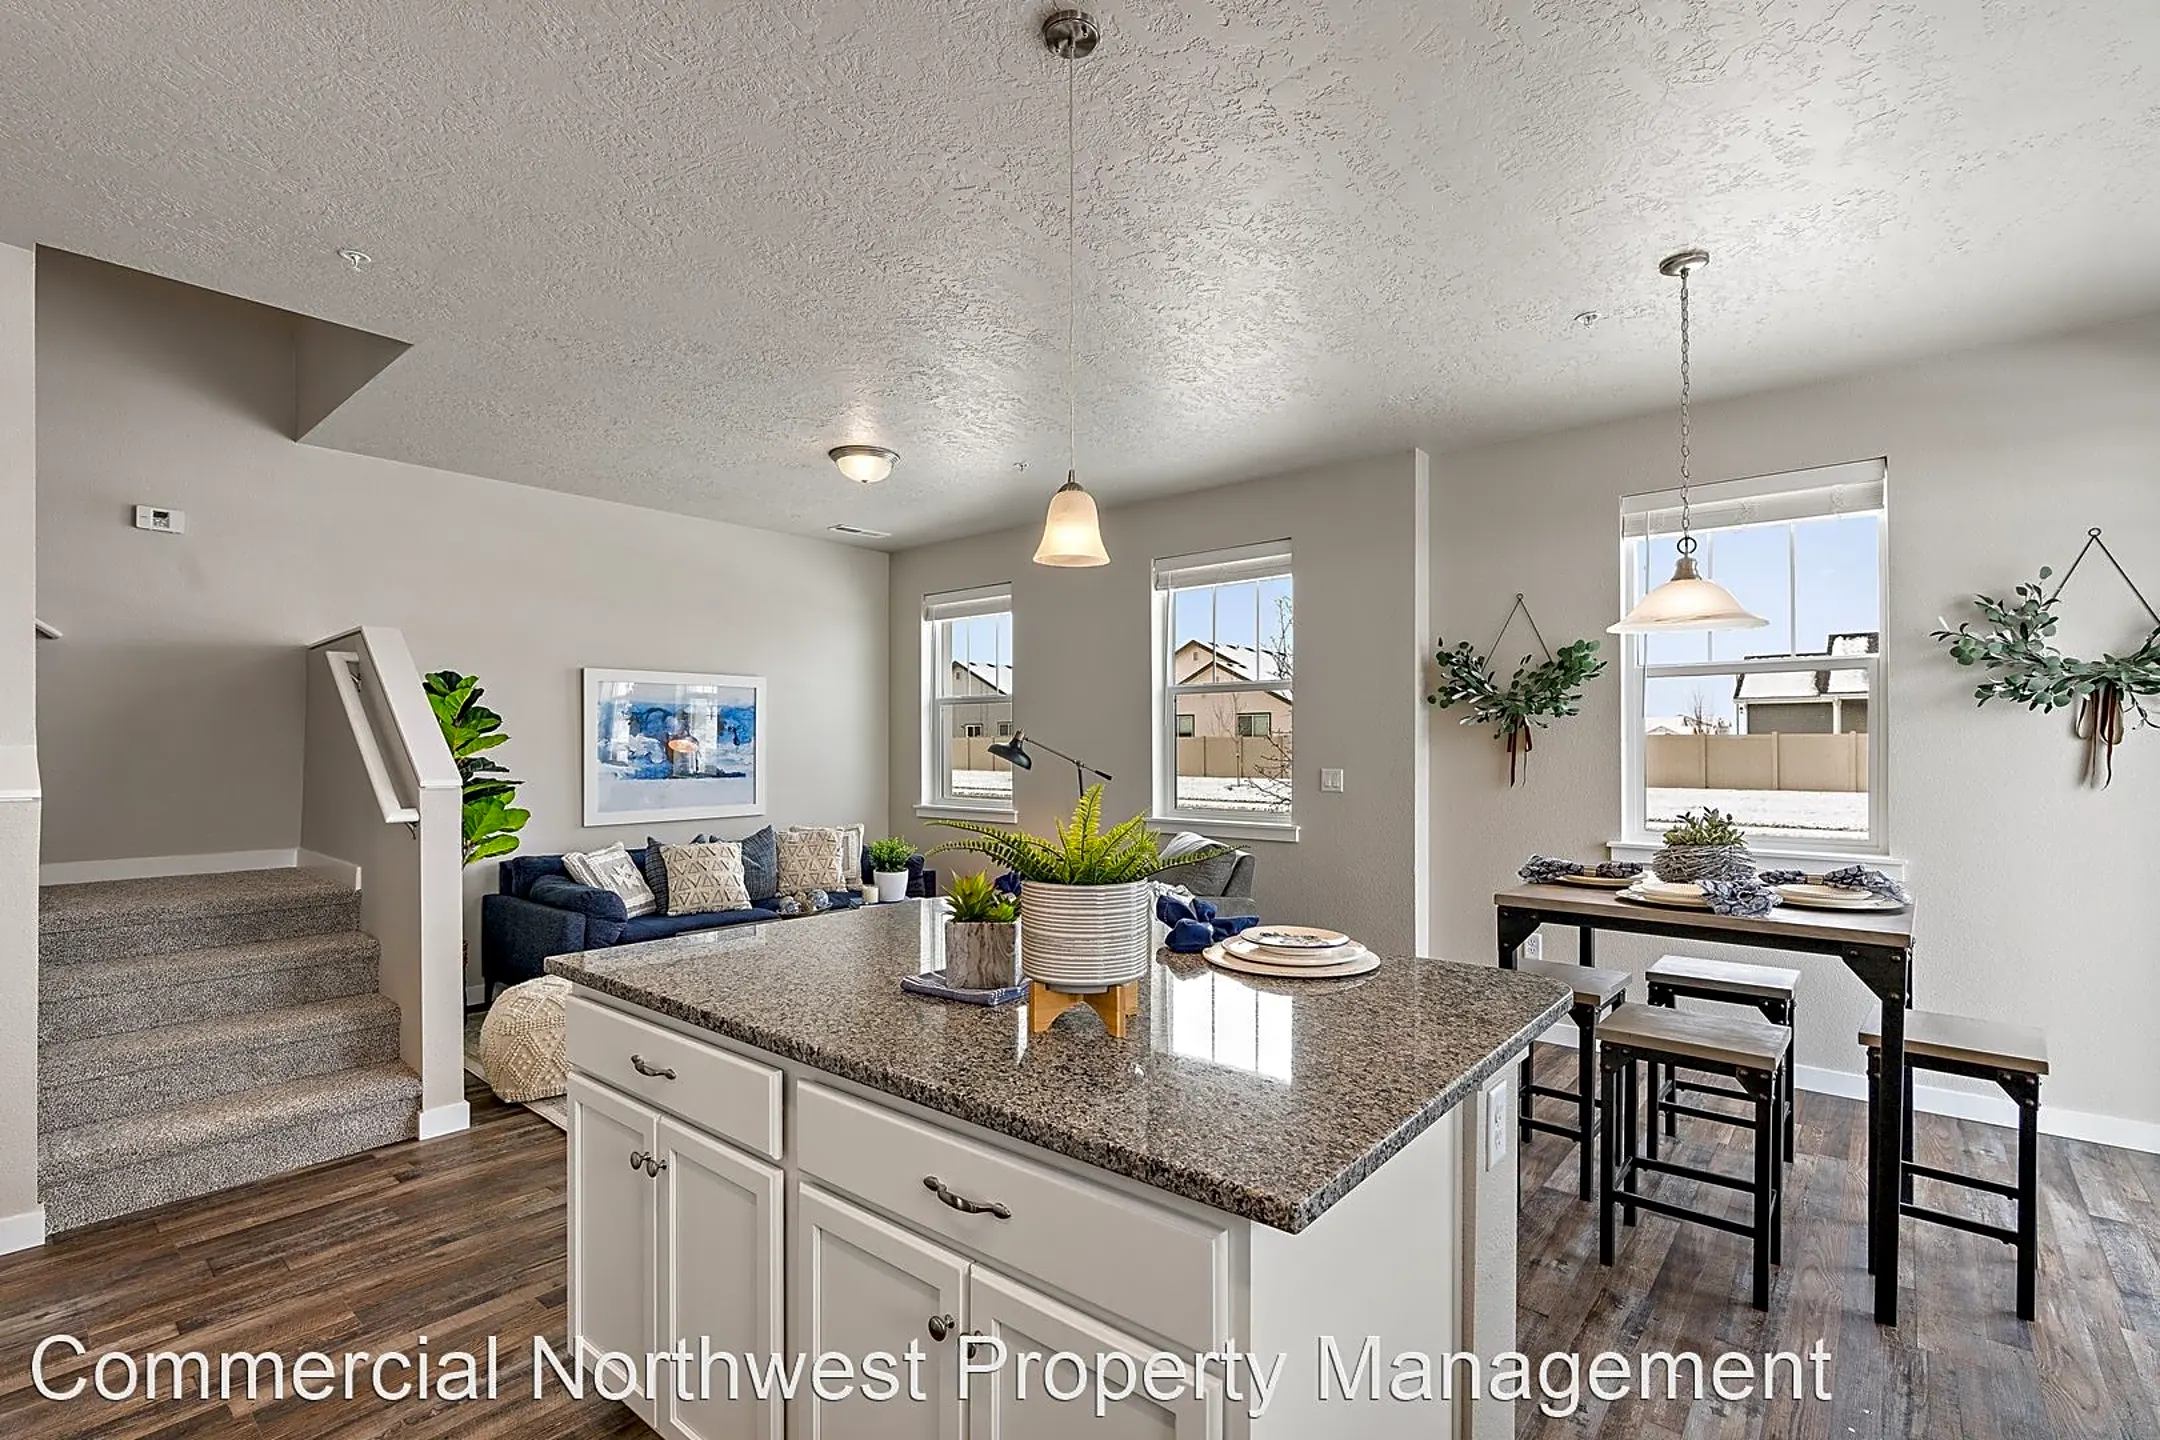 Kitchen - Sunnyvale Village ! 1 Month Free for All Move-ins before 3/15! - Nampa, ID